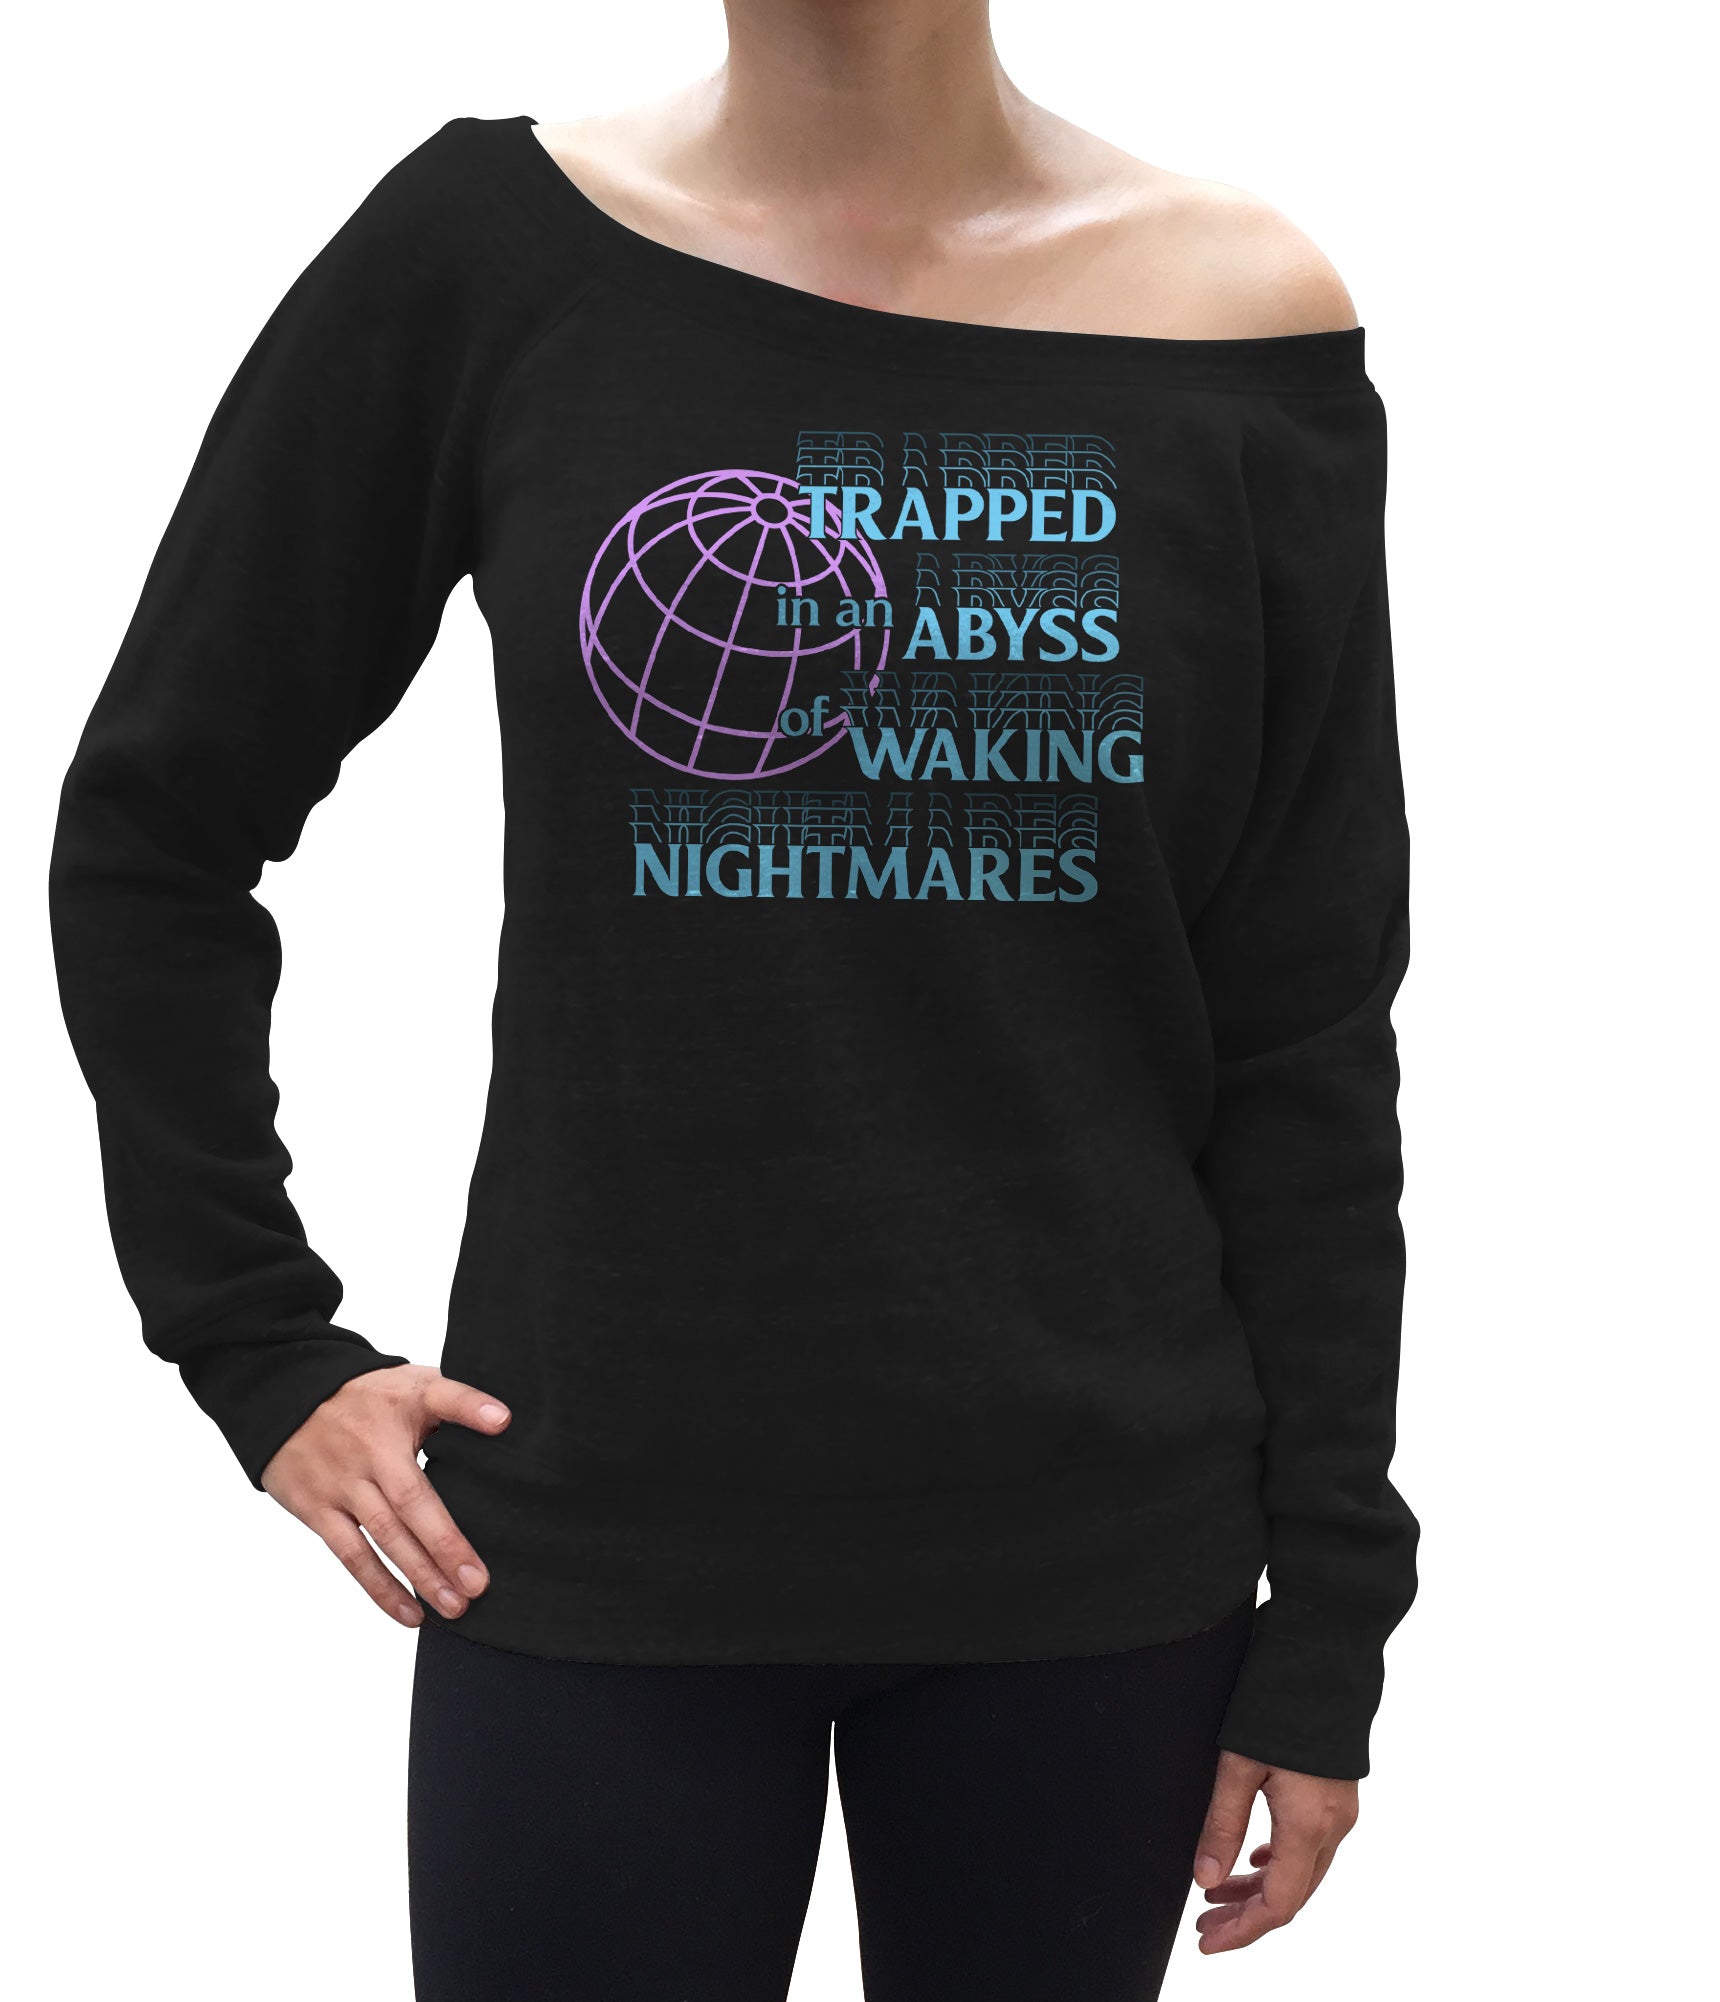 Women's Trapped in an Abyss of Waking Nightmares Scoop Neck Fleece